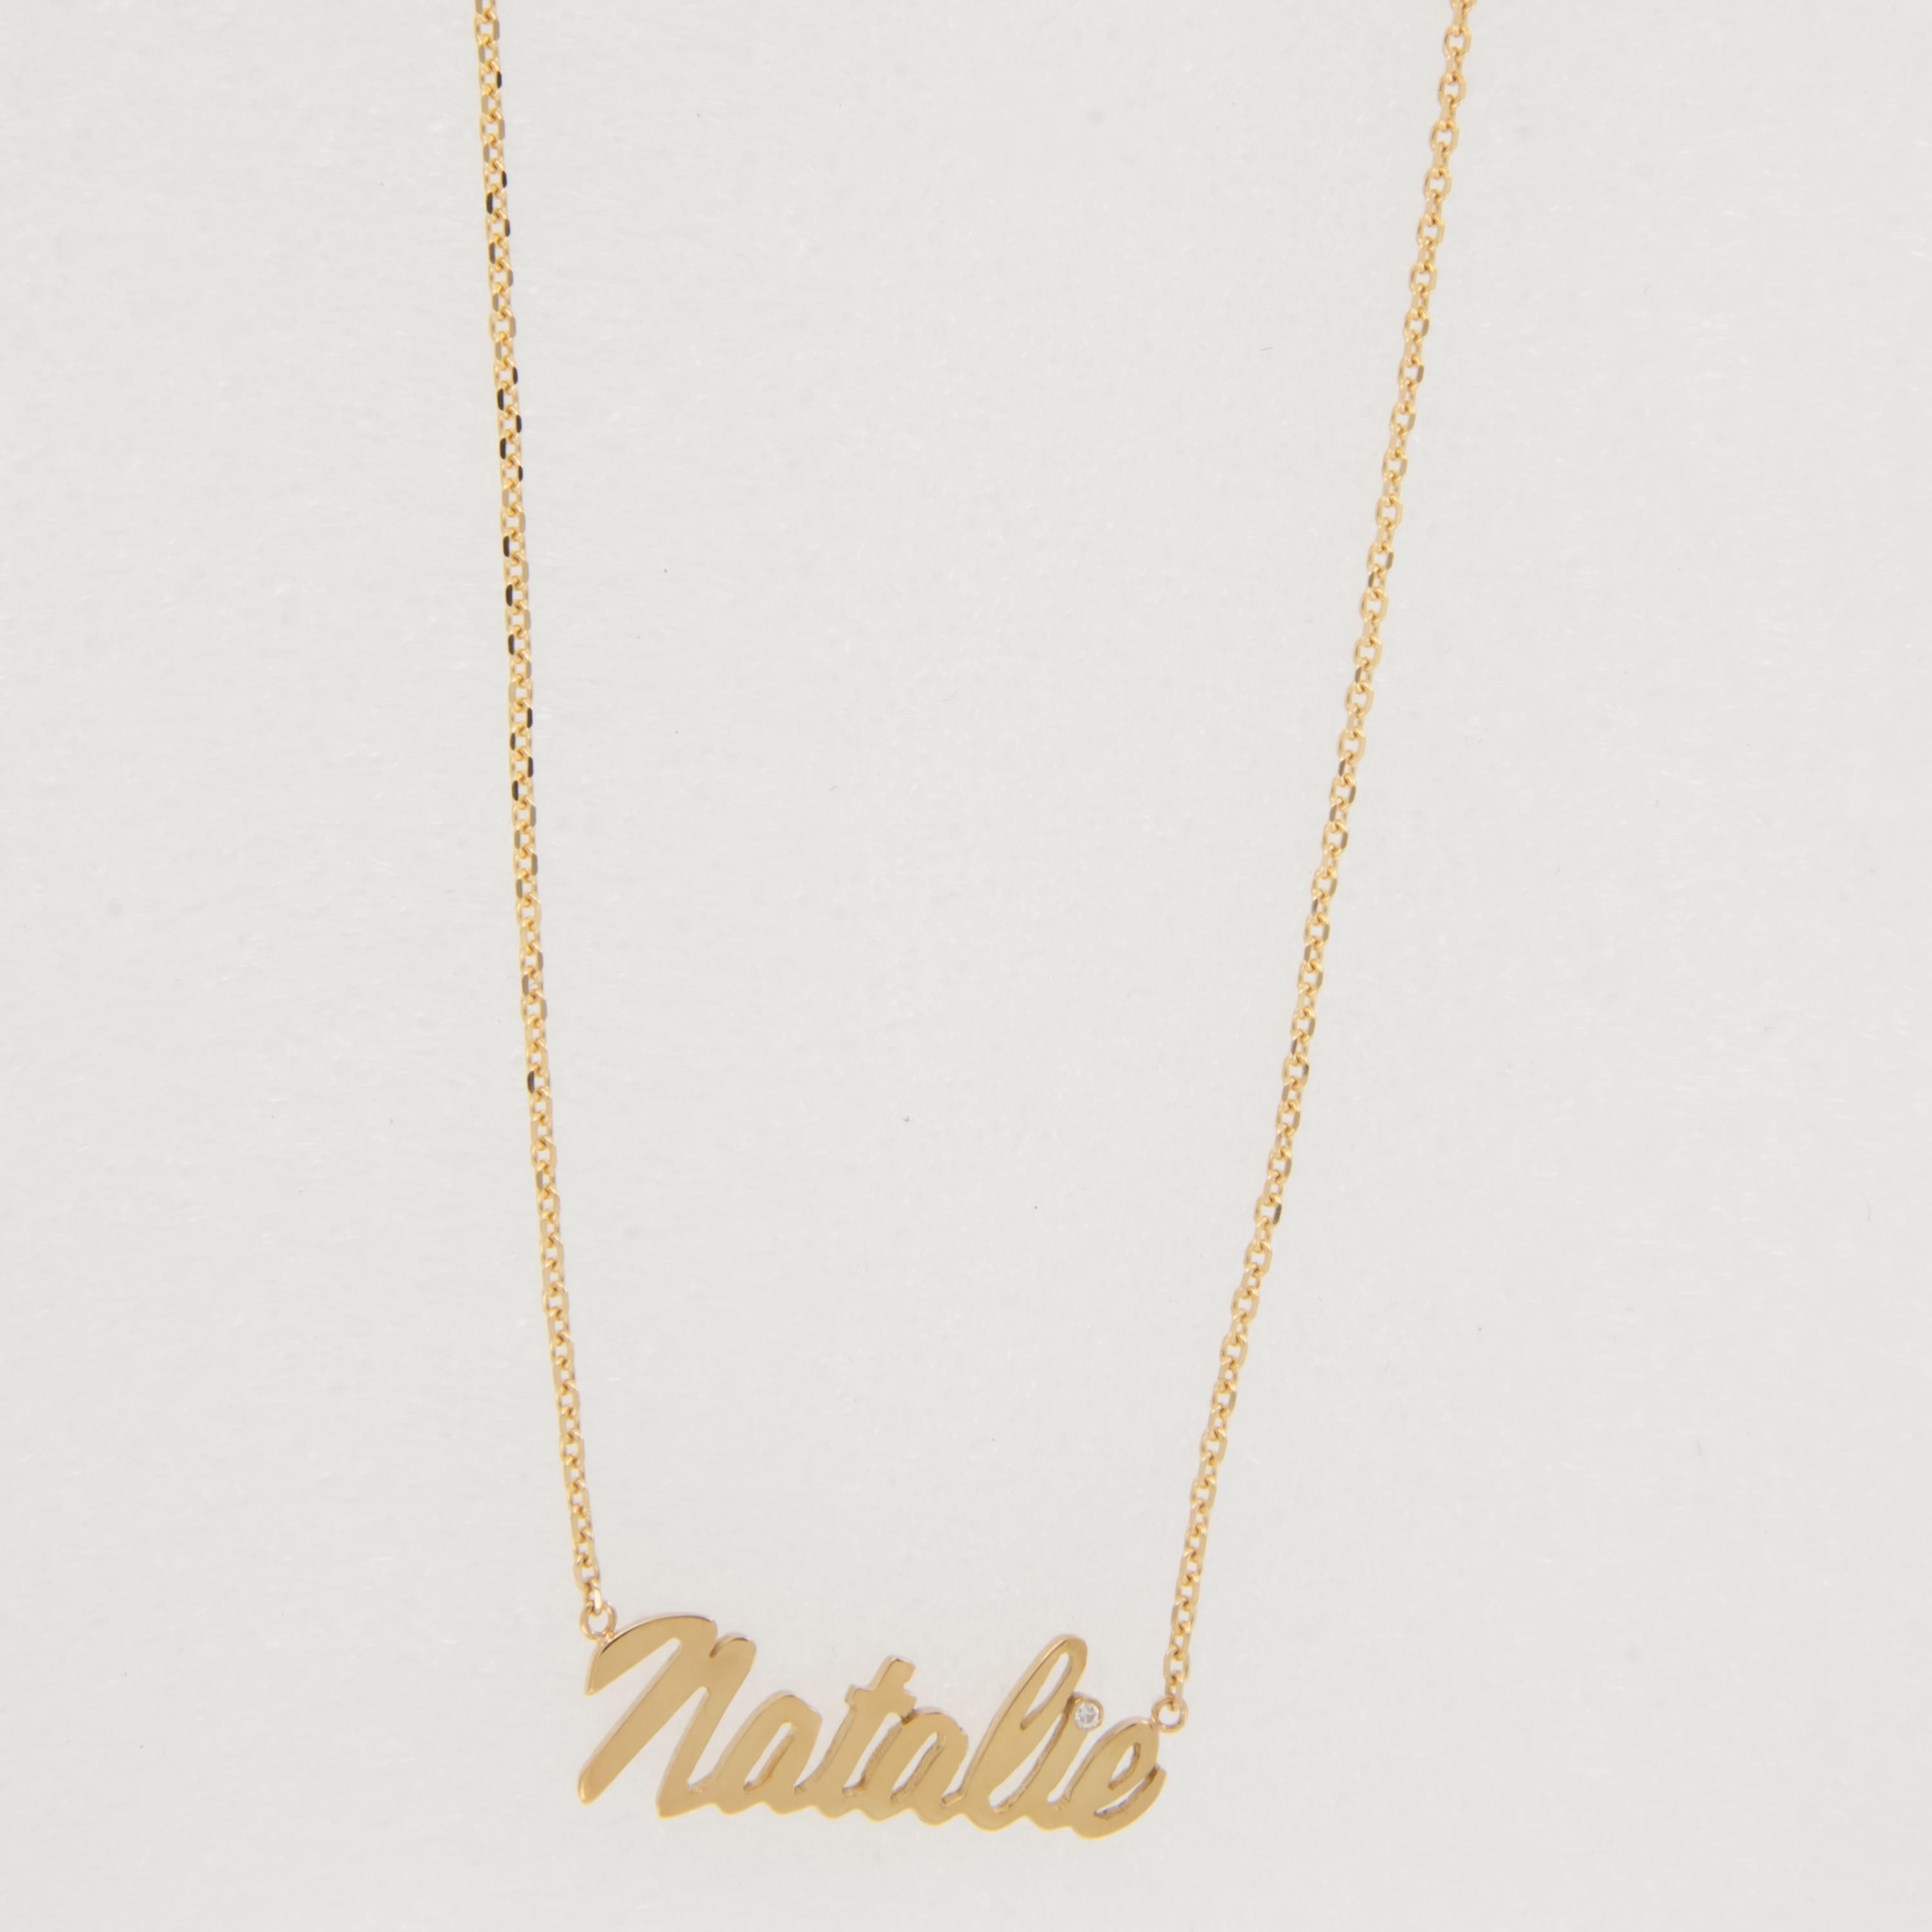 Calling all Natalie's! If your name isn't Natalie you'll wish it was! You will love wearing this beautiful 18 karat yellow gold Natalie necklace with 0.01Ct RBC diamond in 